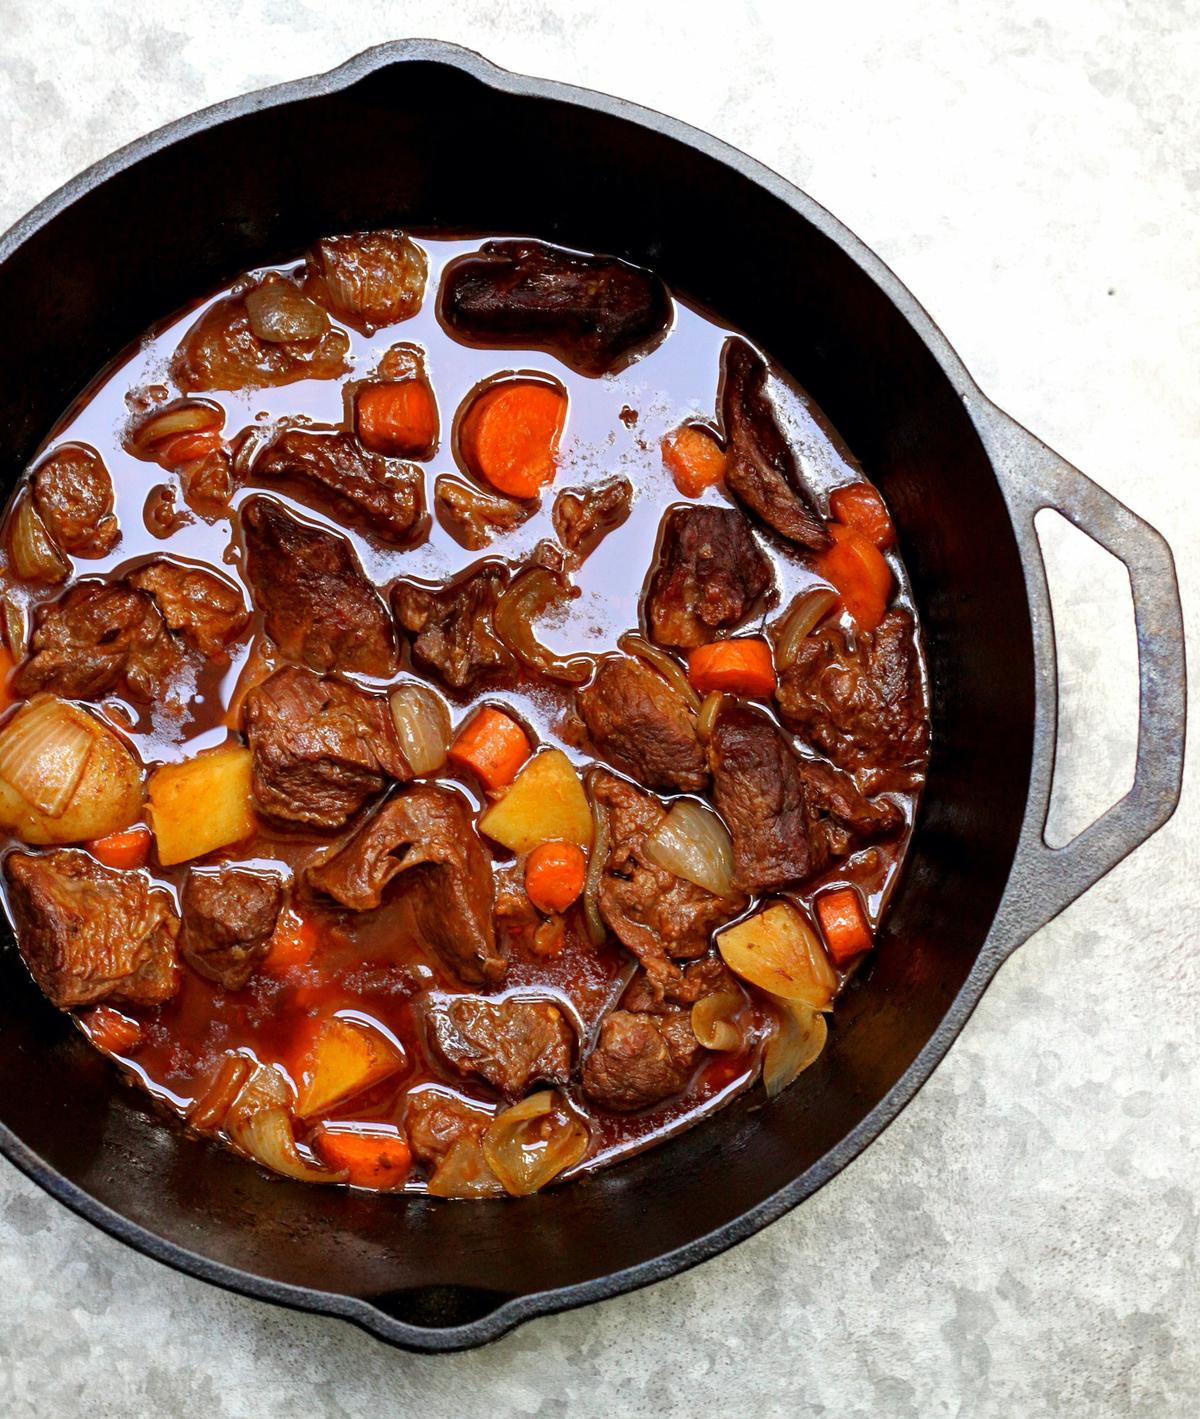 This hearty, no-nonsense beef stew is full of chunky vegetables and slow-cooked beef swimming in a stock of beef and beer. (Lynda Balslev for Tastefood)